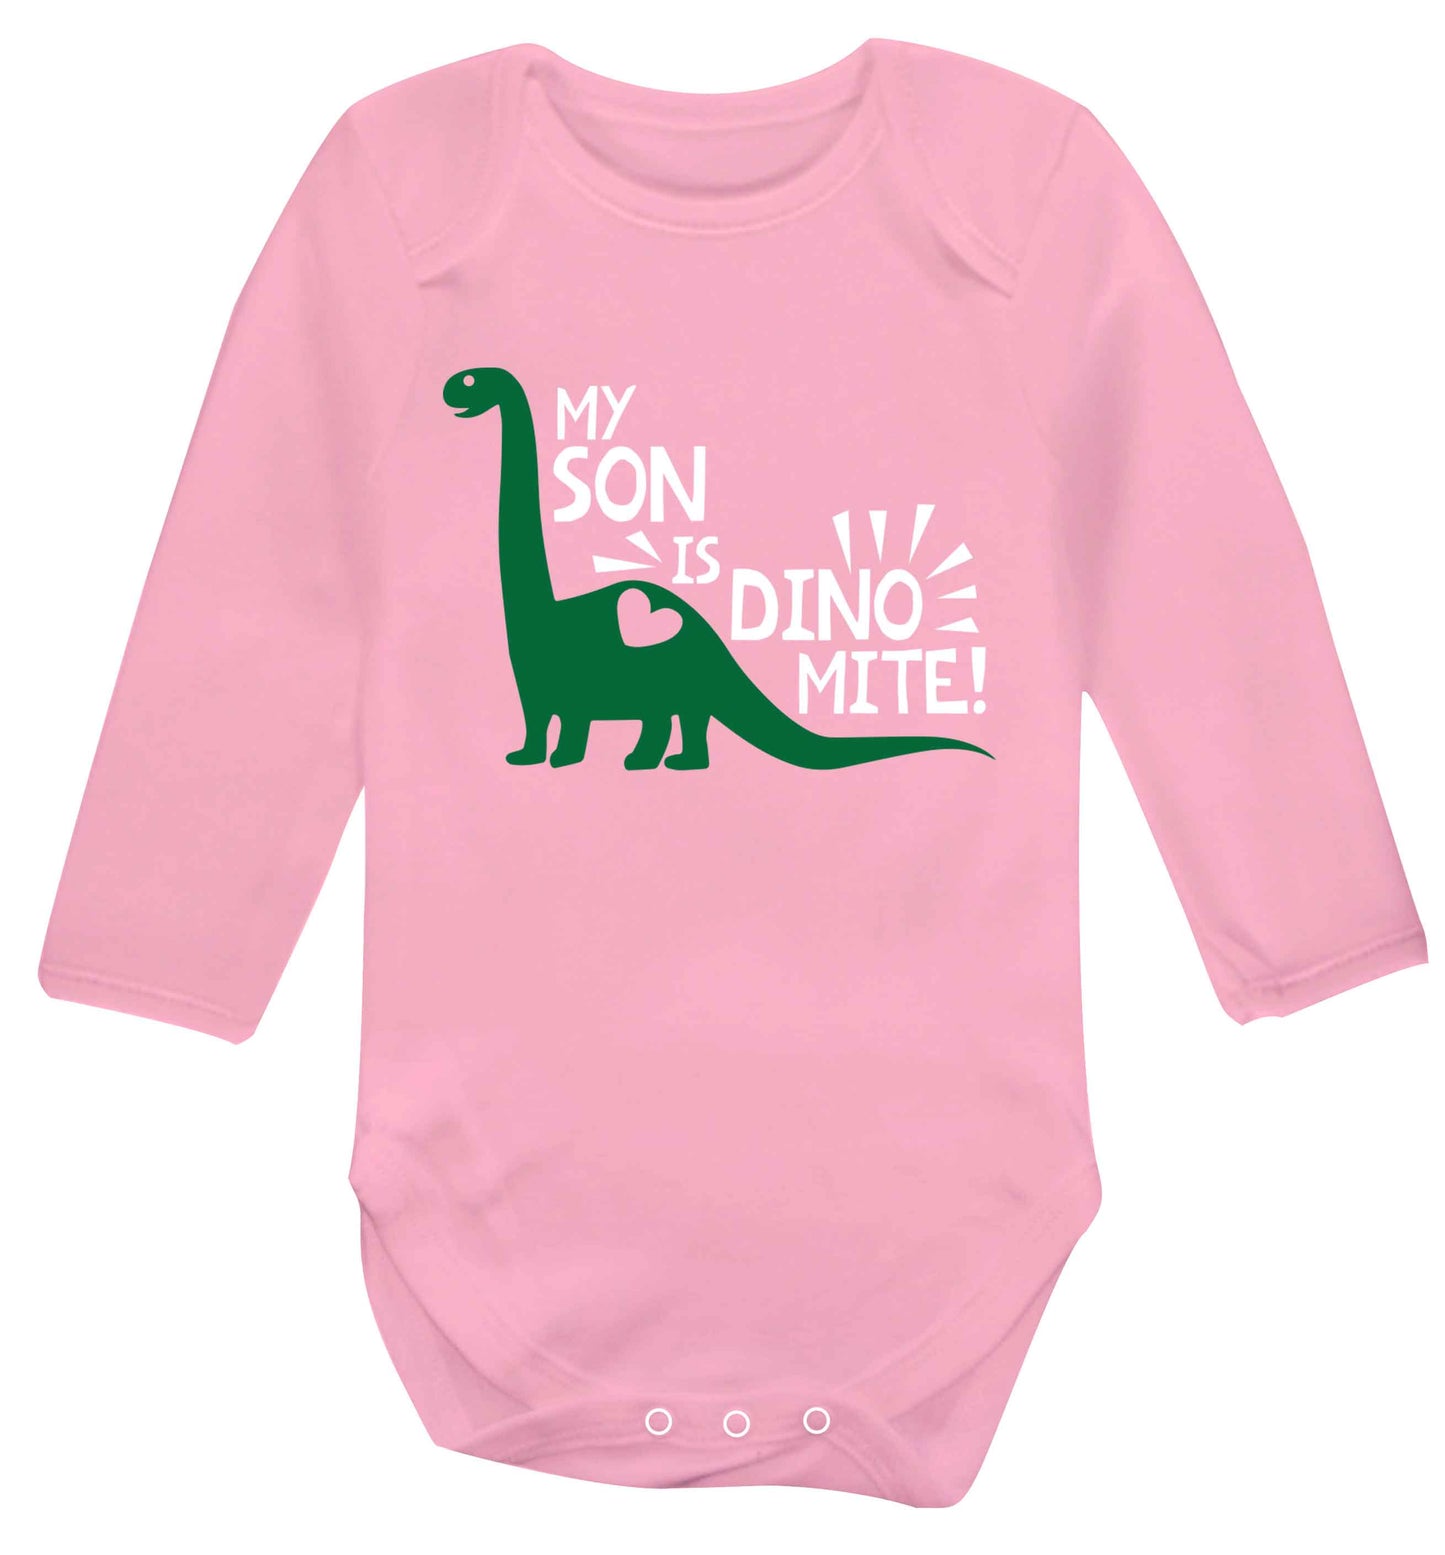 My son is dinomite! Baby Vest long sleeved pale pink 6-12 months